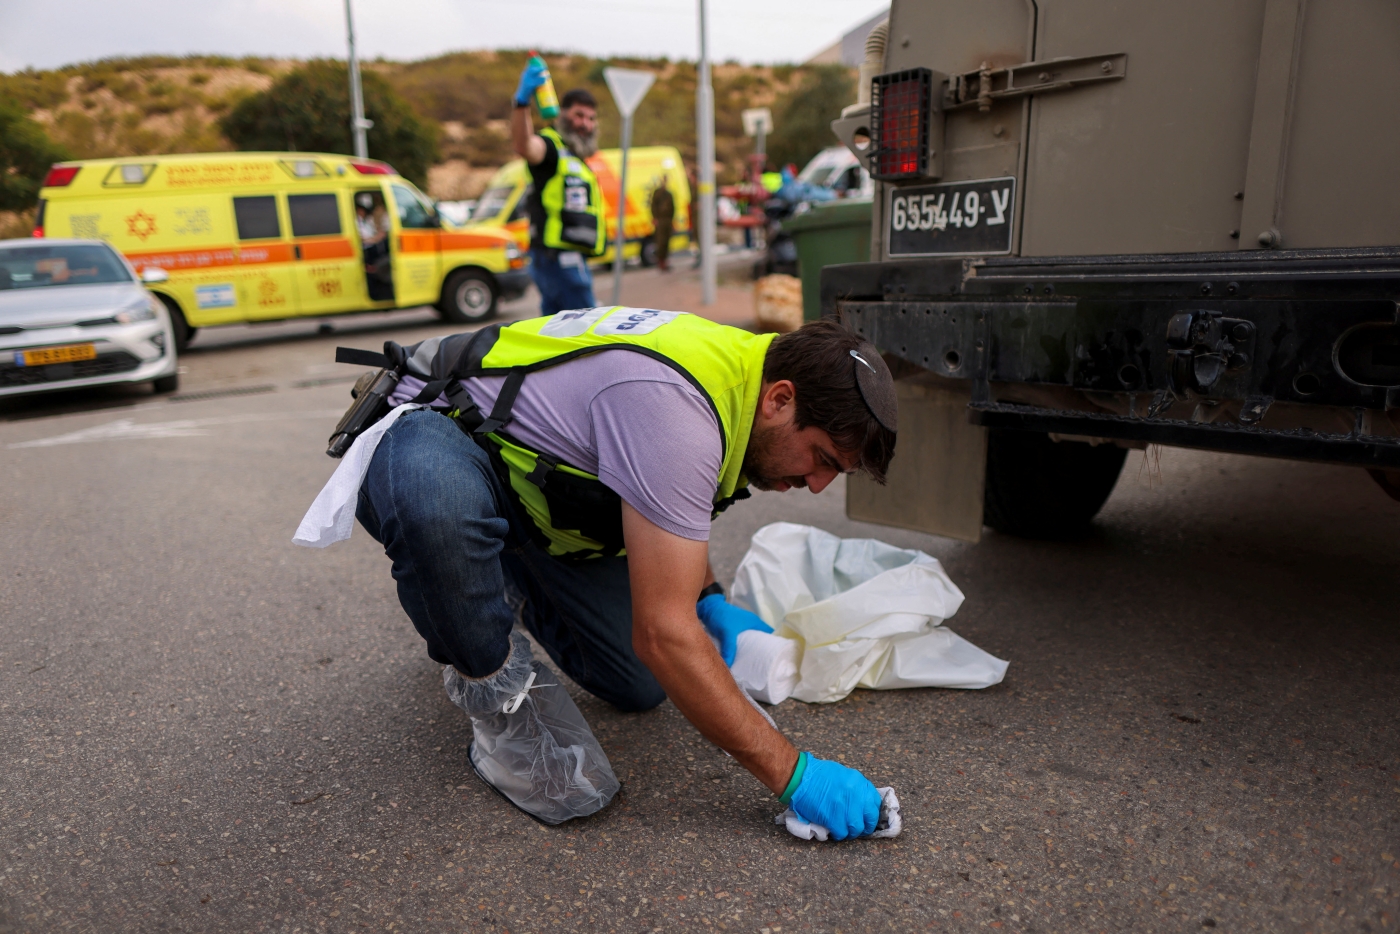 A member of an Israeli emergency response team works at the scene of an attack near the Ariel settlement in the Israeli-occupied West Bank 15 November 2022 (Reuters)